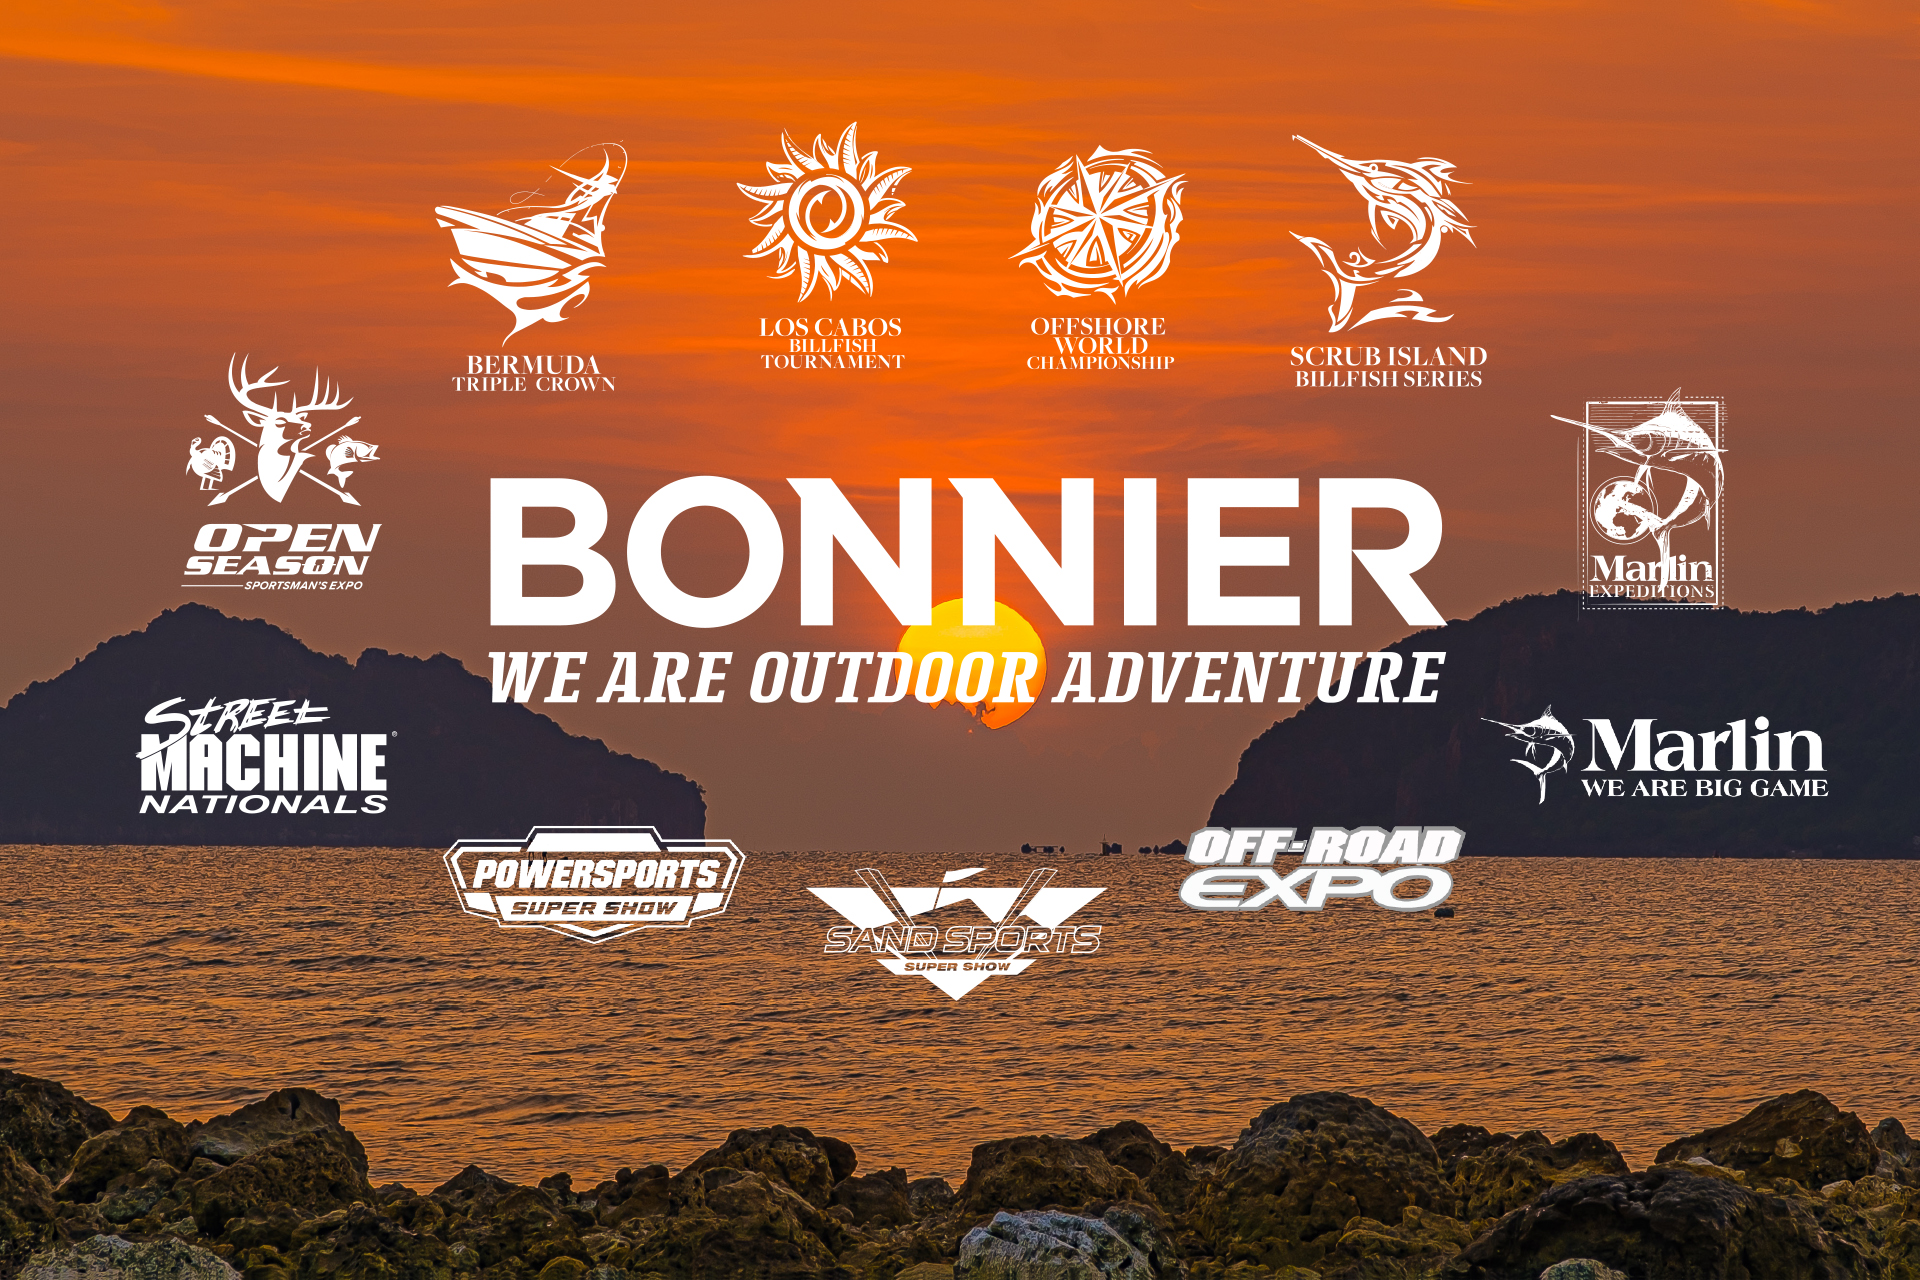 The Bonnier logo overlayed a sunset on the ocean and surrounded by brand logos in its portfolio: Marlin, Marlin Expeditions, Bermuda Triple Crown, Los Cabos Billfish Tournament, Offshore World Championship, Scrub Island Billfish Series, Open Season Sportsman's Expo, Street Machine Nationals, Powersports Super Show, Sand Sports Super Show, Off-Road Expo.